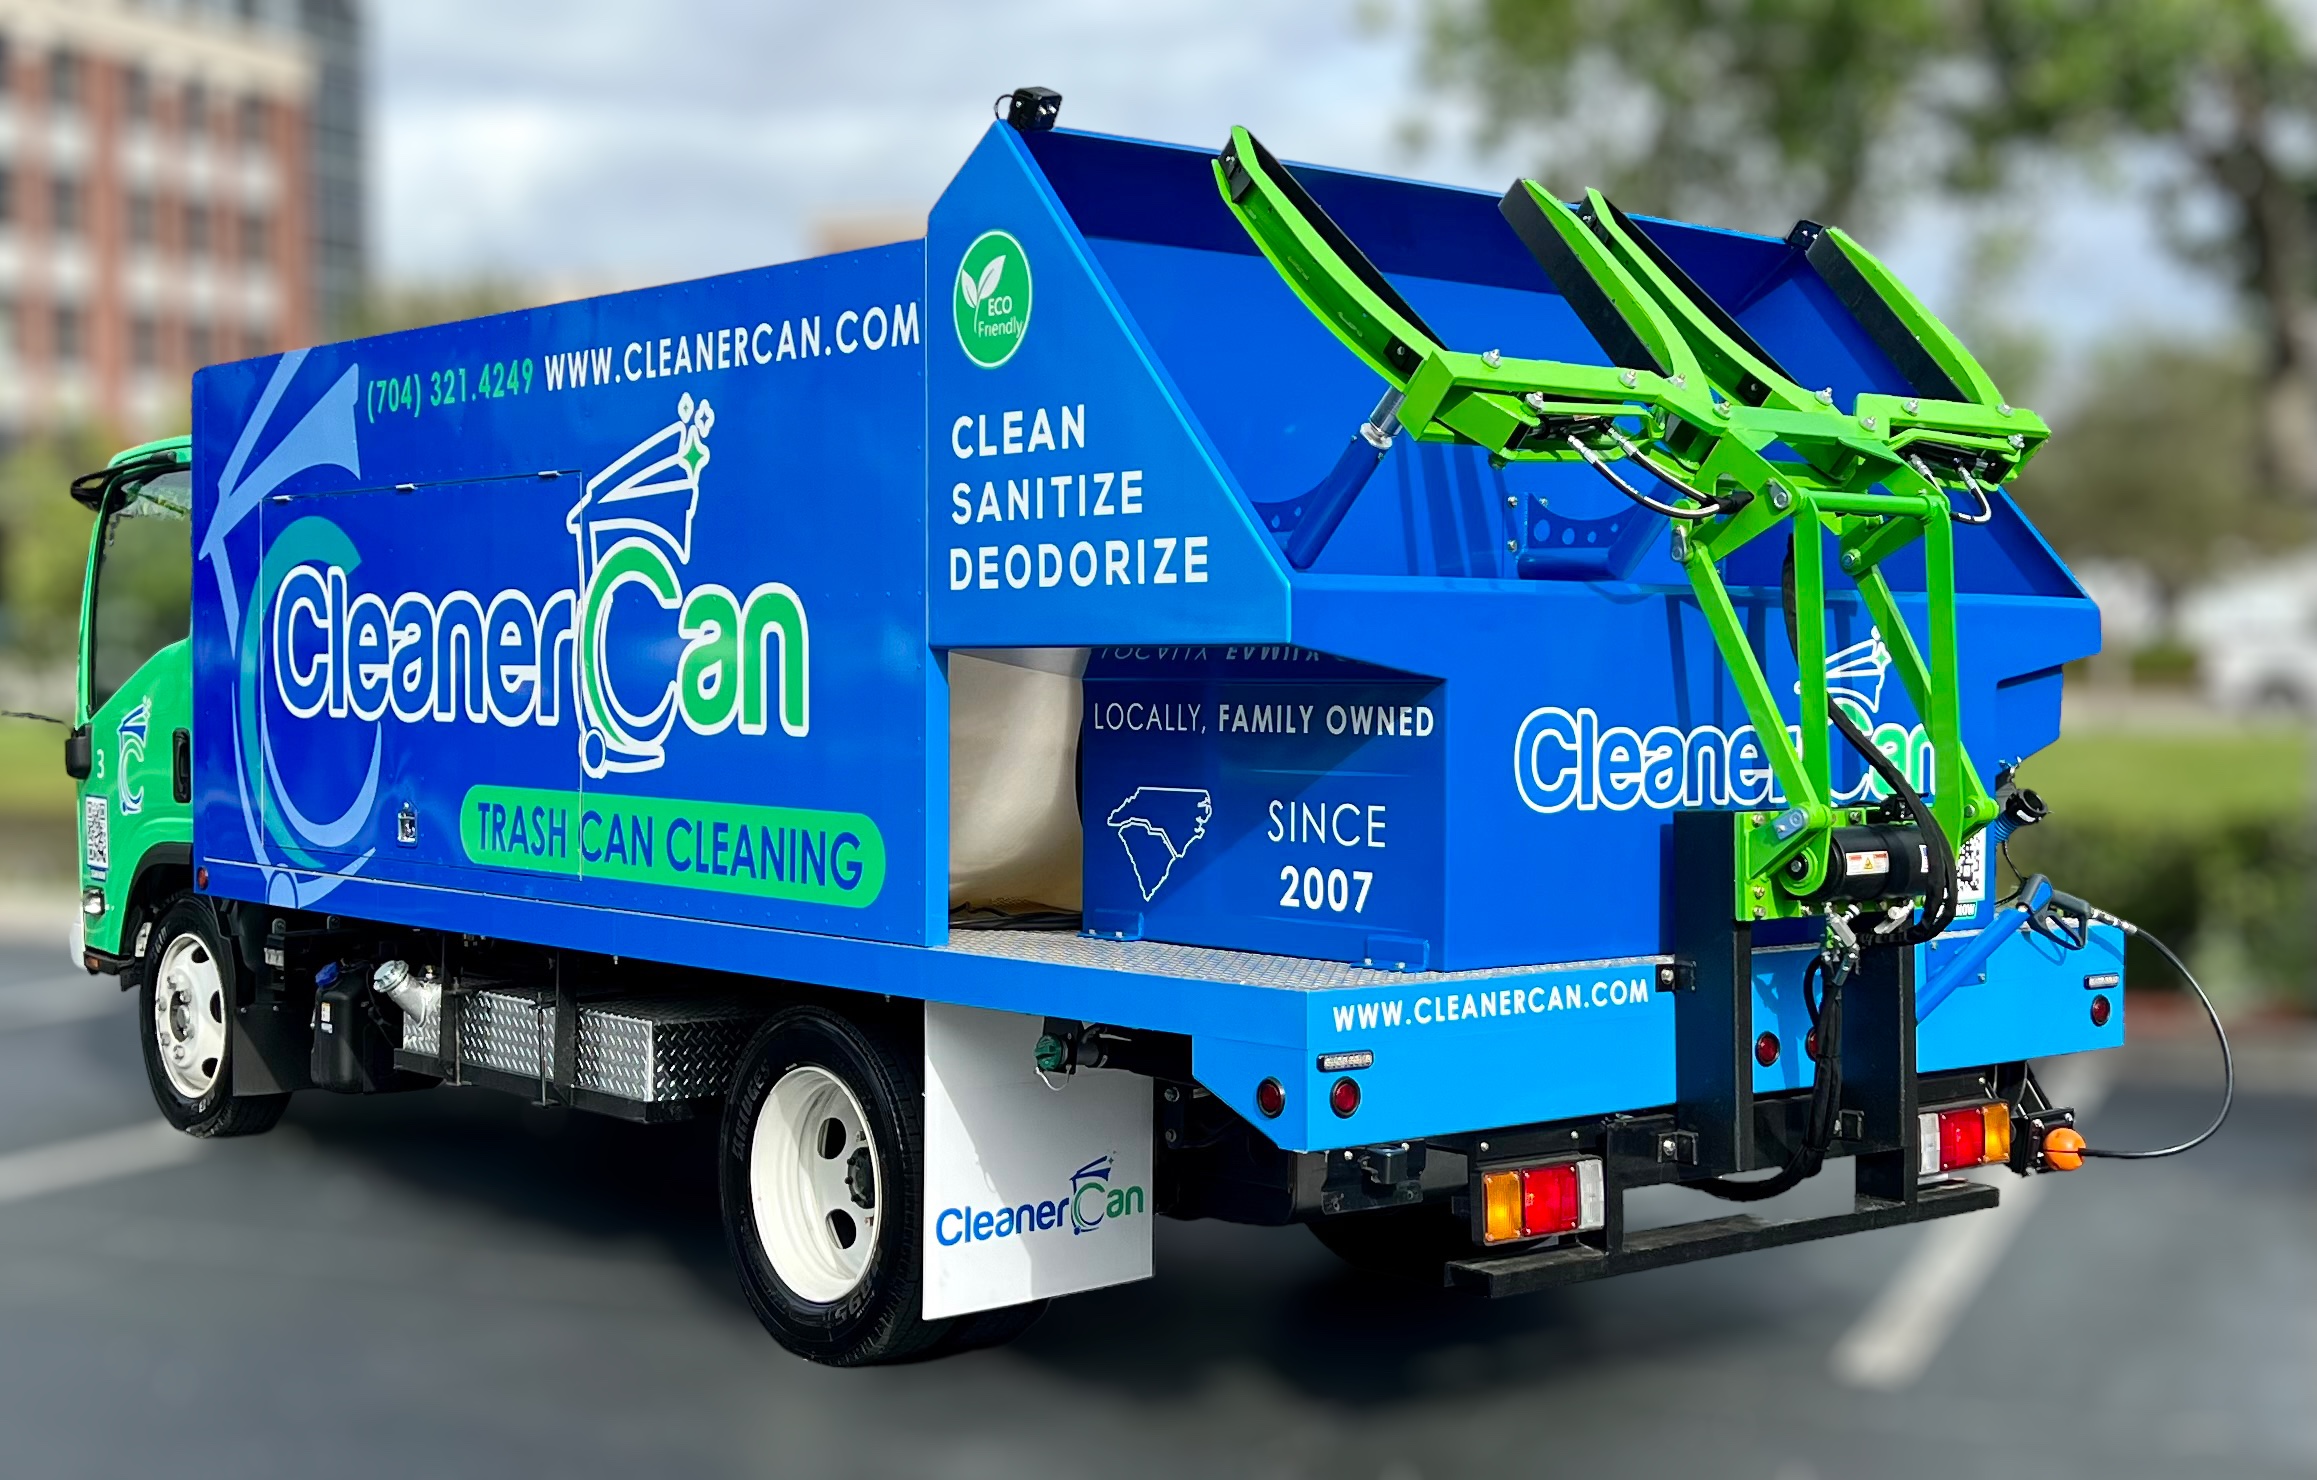 T0245_garbage_can_cleaning_truck